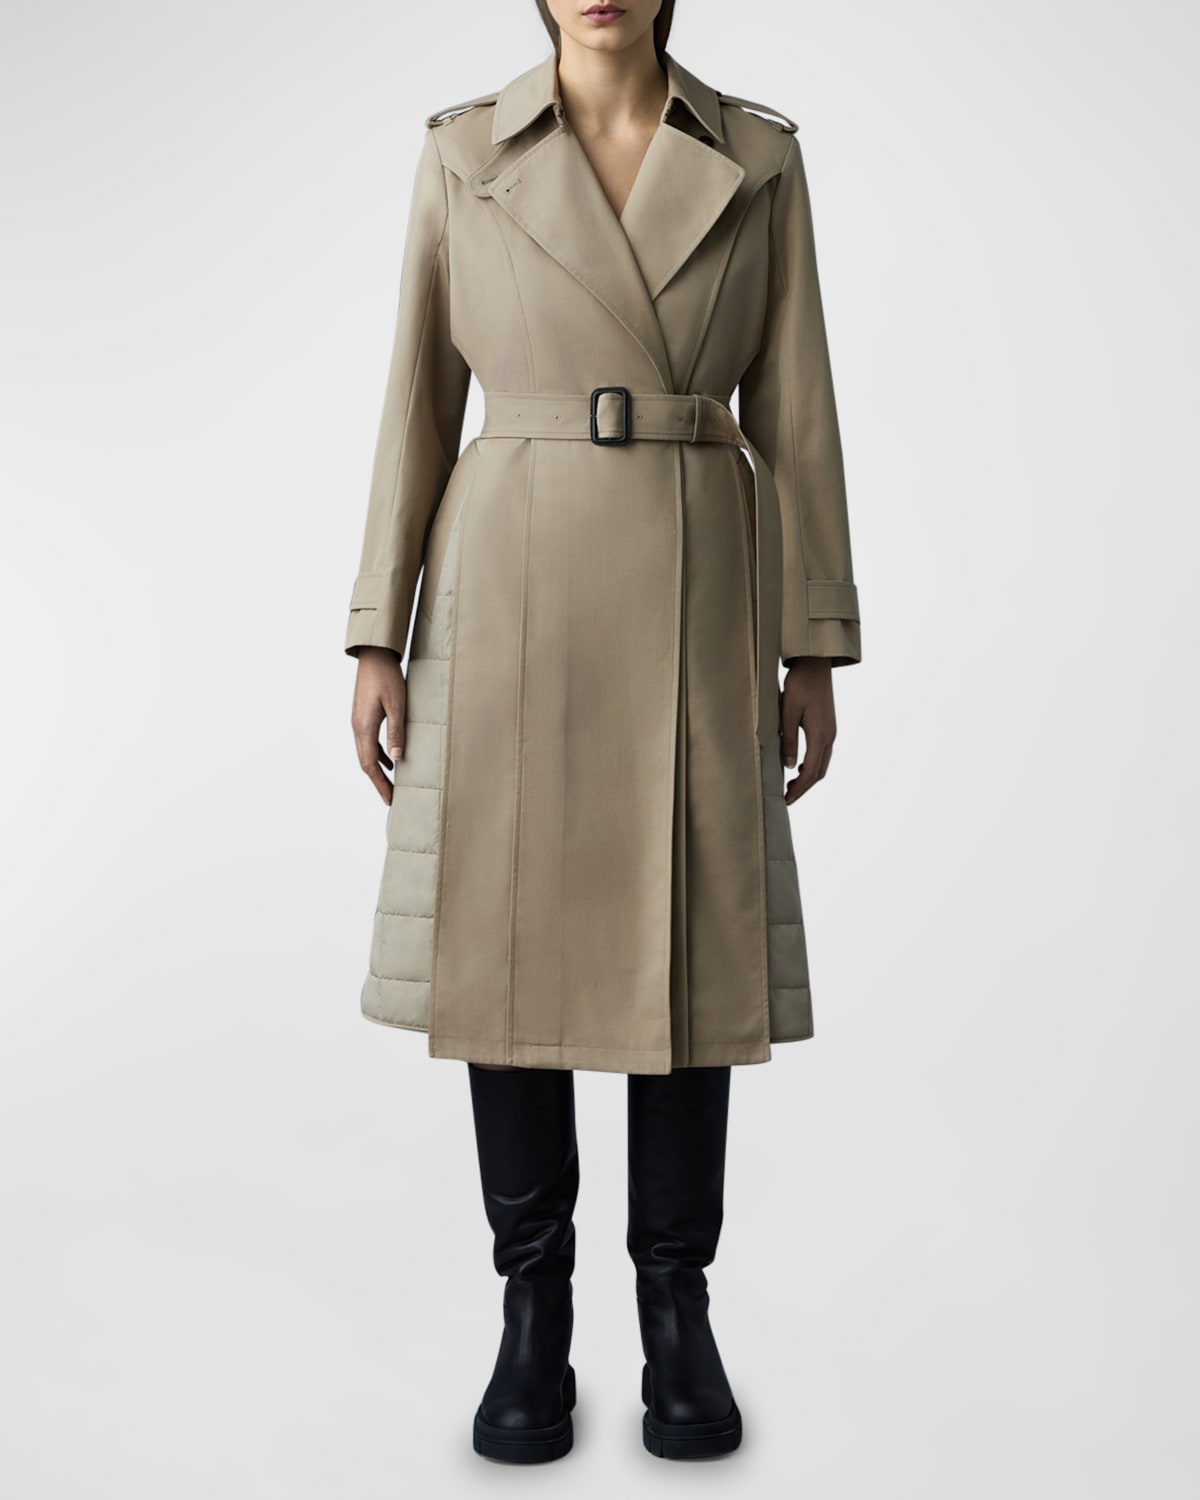 Astrid Mixed Media Belted Trench Coat